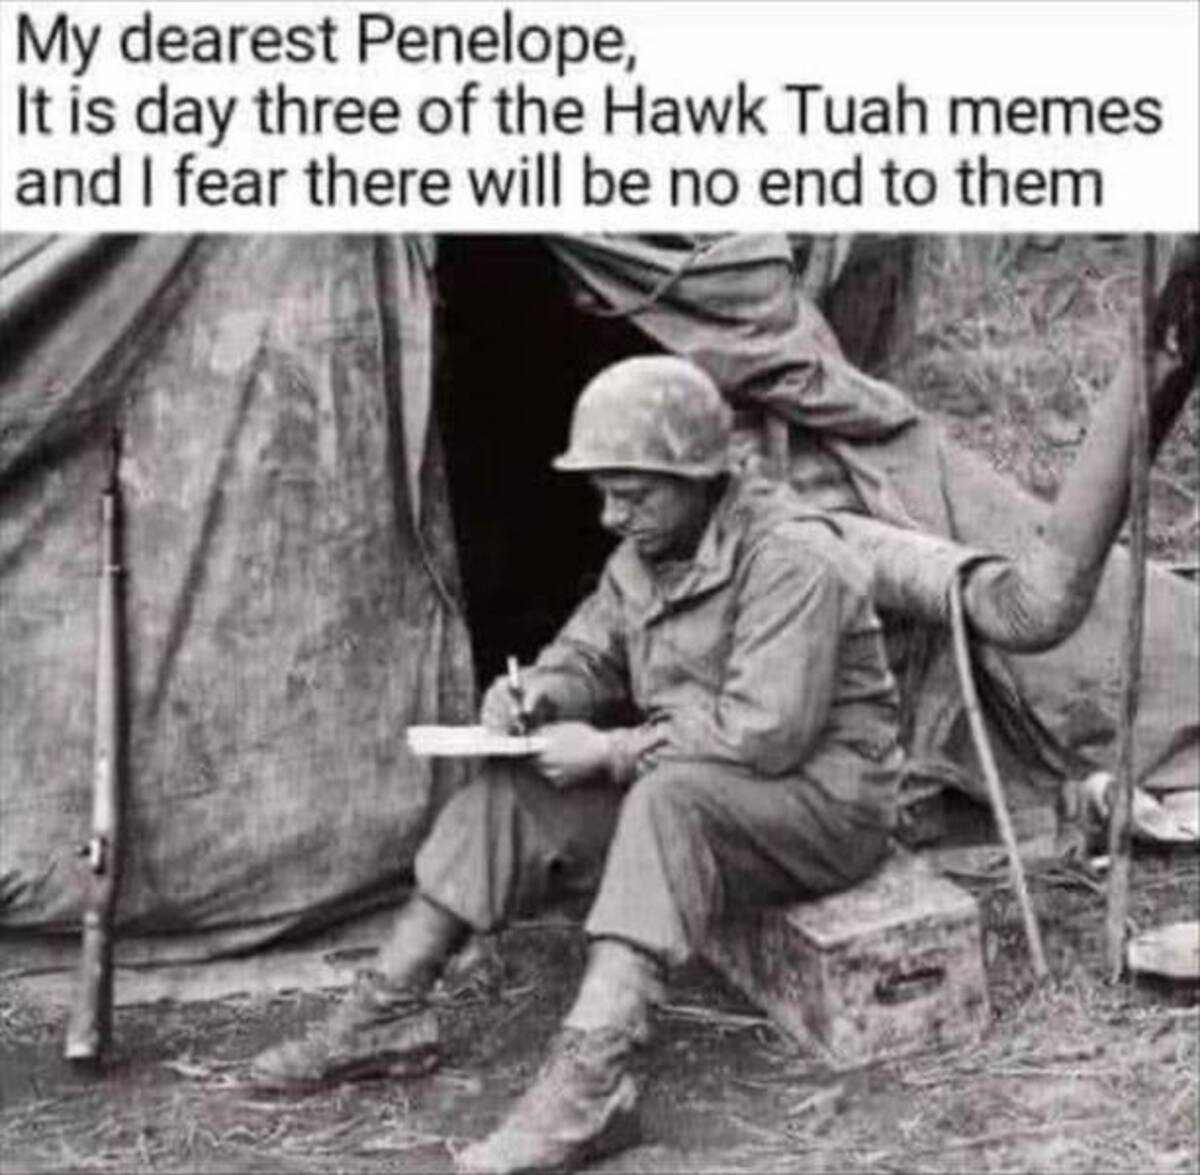 dear penelope meme - My dearest Penelope, It is day three of the Hawk Tuah memes and I fear there will be no end to them